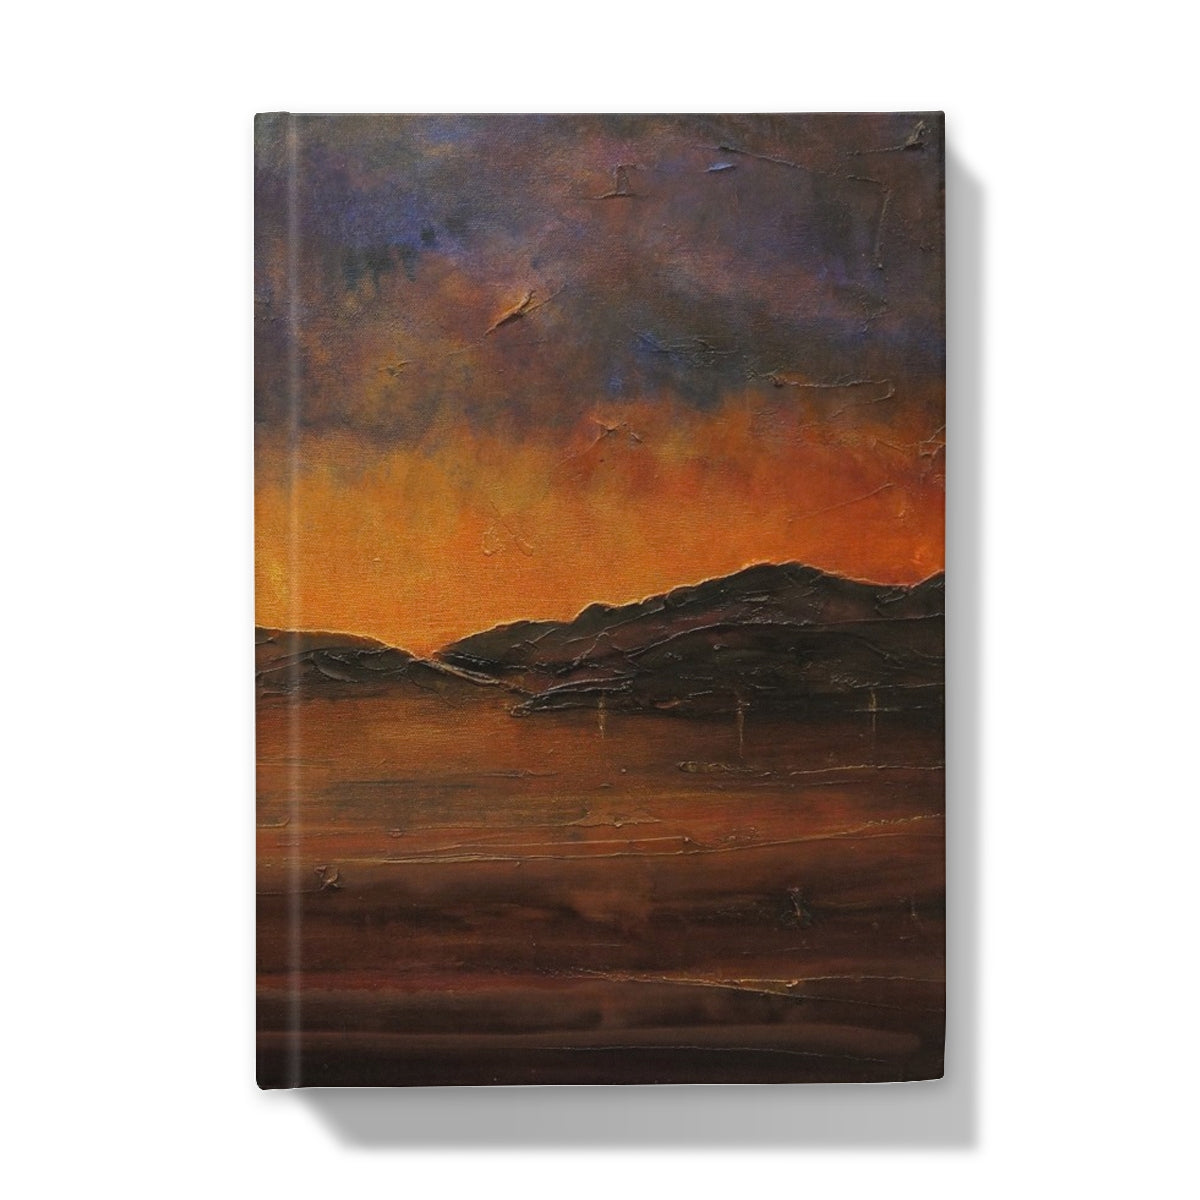 A Brooding Clyde Dusk Art Gifts Hardback Journal-Journals & Notebooks-River Clyde Art Gallery-A4-Lined-Paintings, Prints, Homeware, Art Gifts From Scotland By Scottish Artist Kevin Hunter